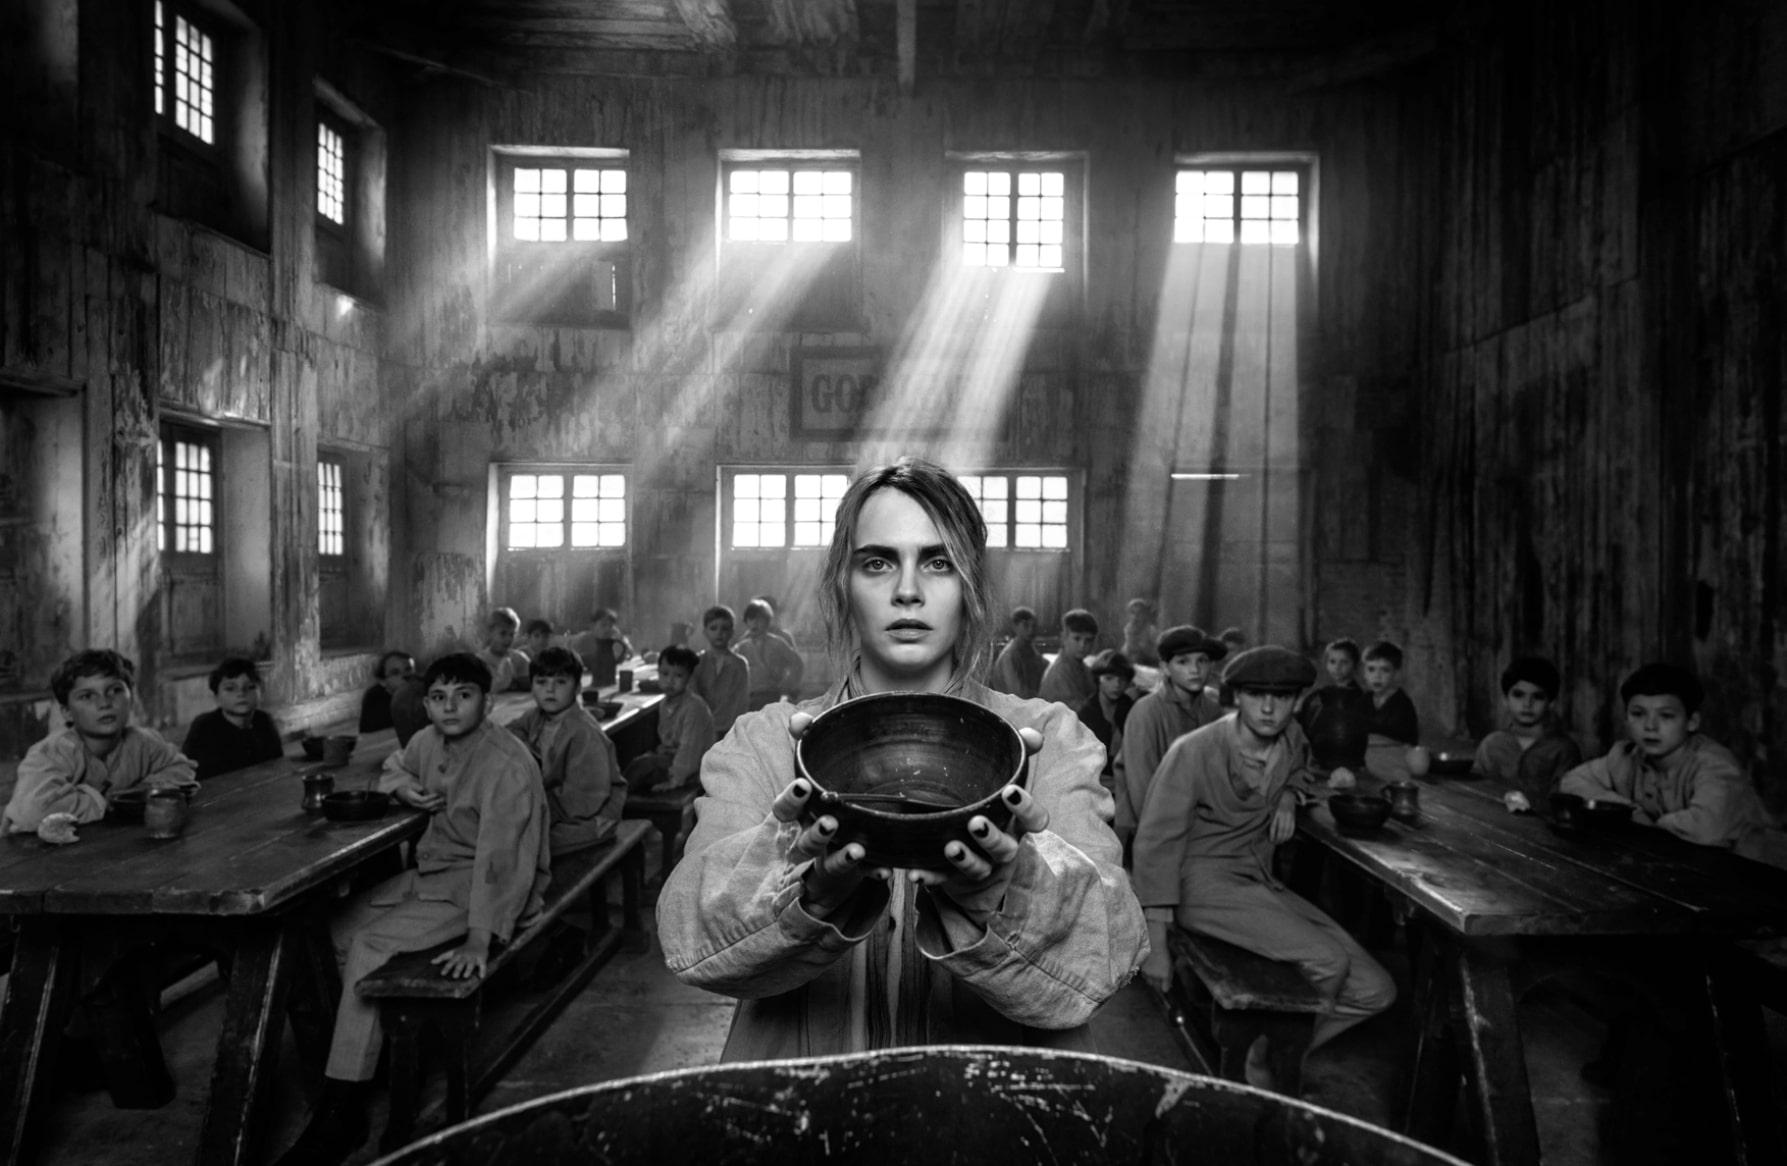 David Yarrow Black and White Photograph - Oliver - Cara Delevigne in the role of Oliver Twist, fine art photography, 2023